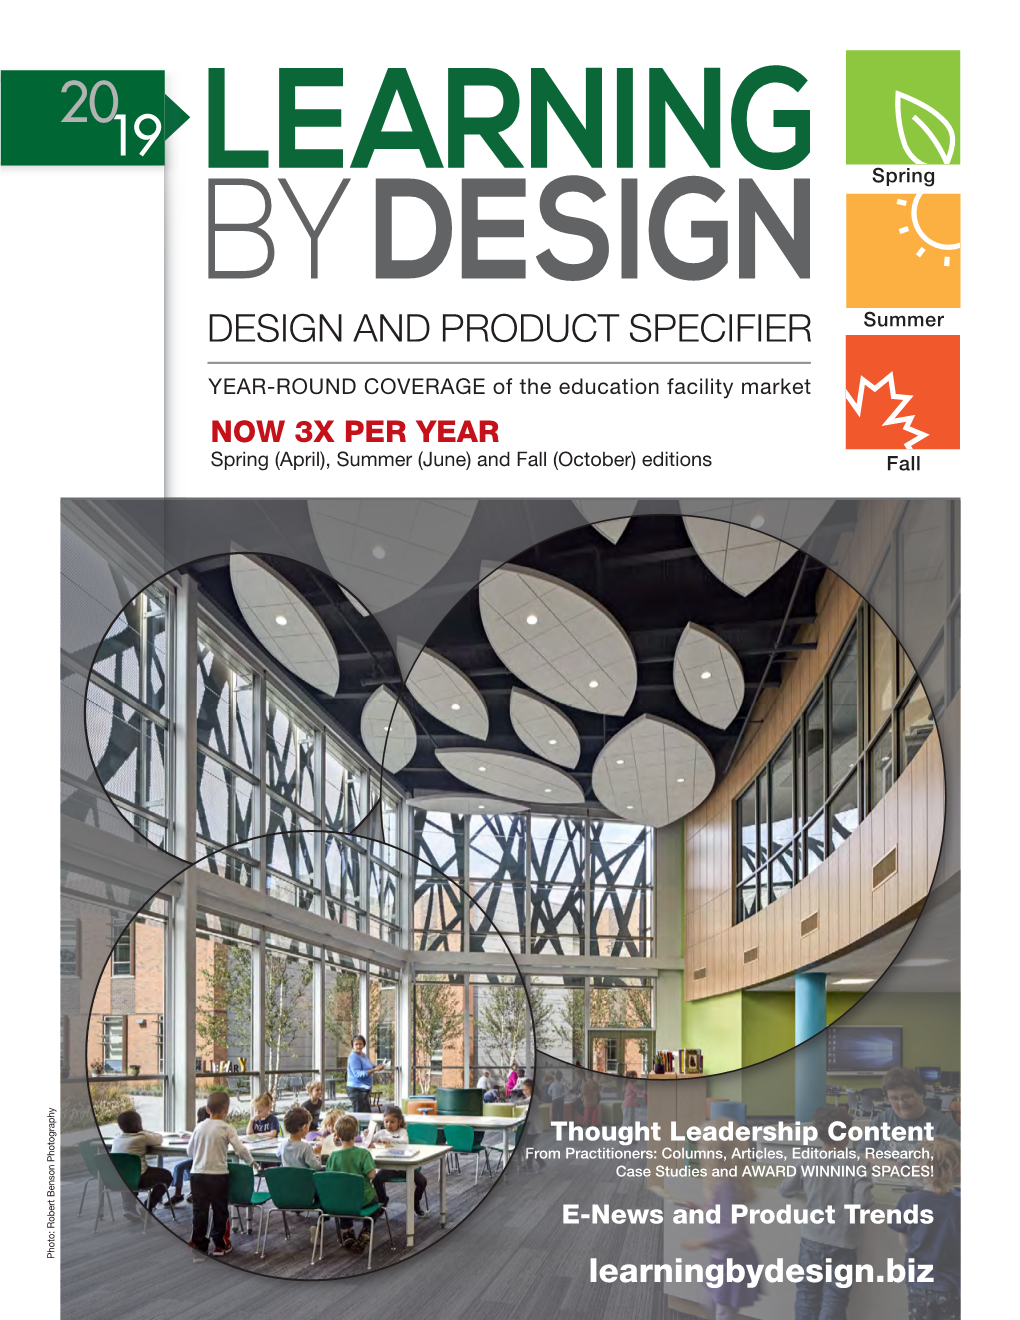 DESIGN and PRODUCT SPECIFIER Summer